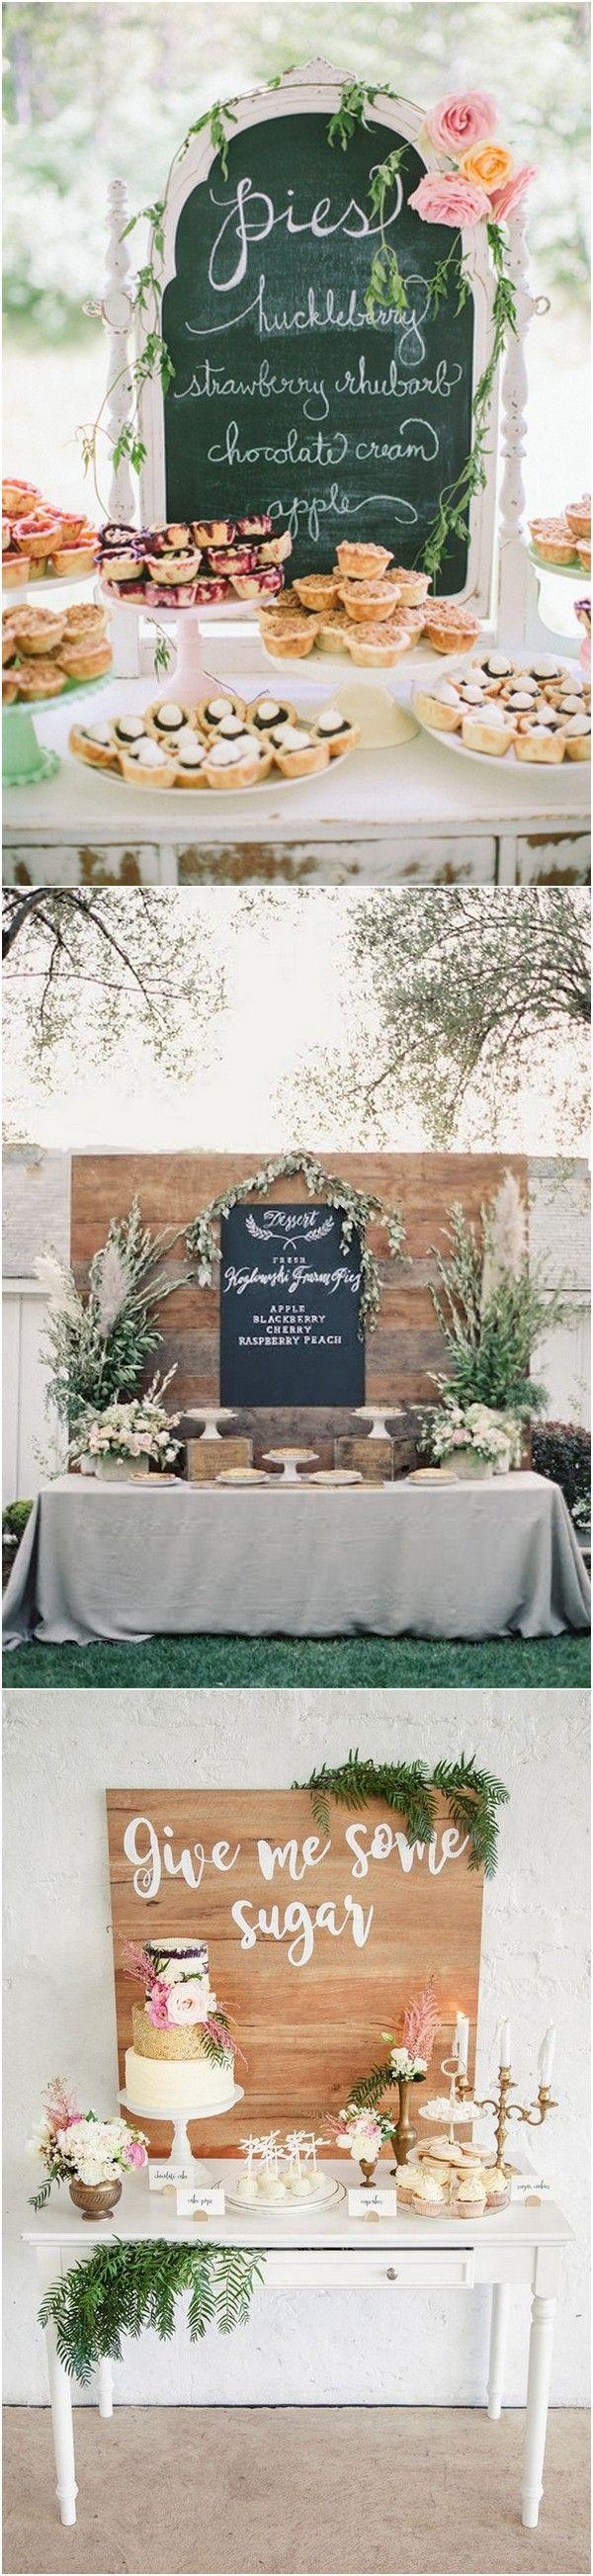 Wedding - 16 Country Rustic Wedding Dessert Table Ideas - Page 3 Of 4